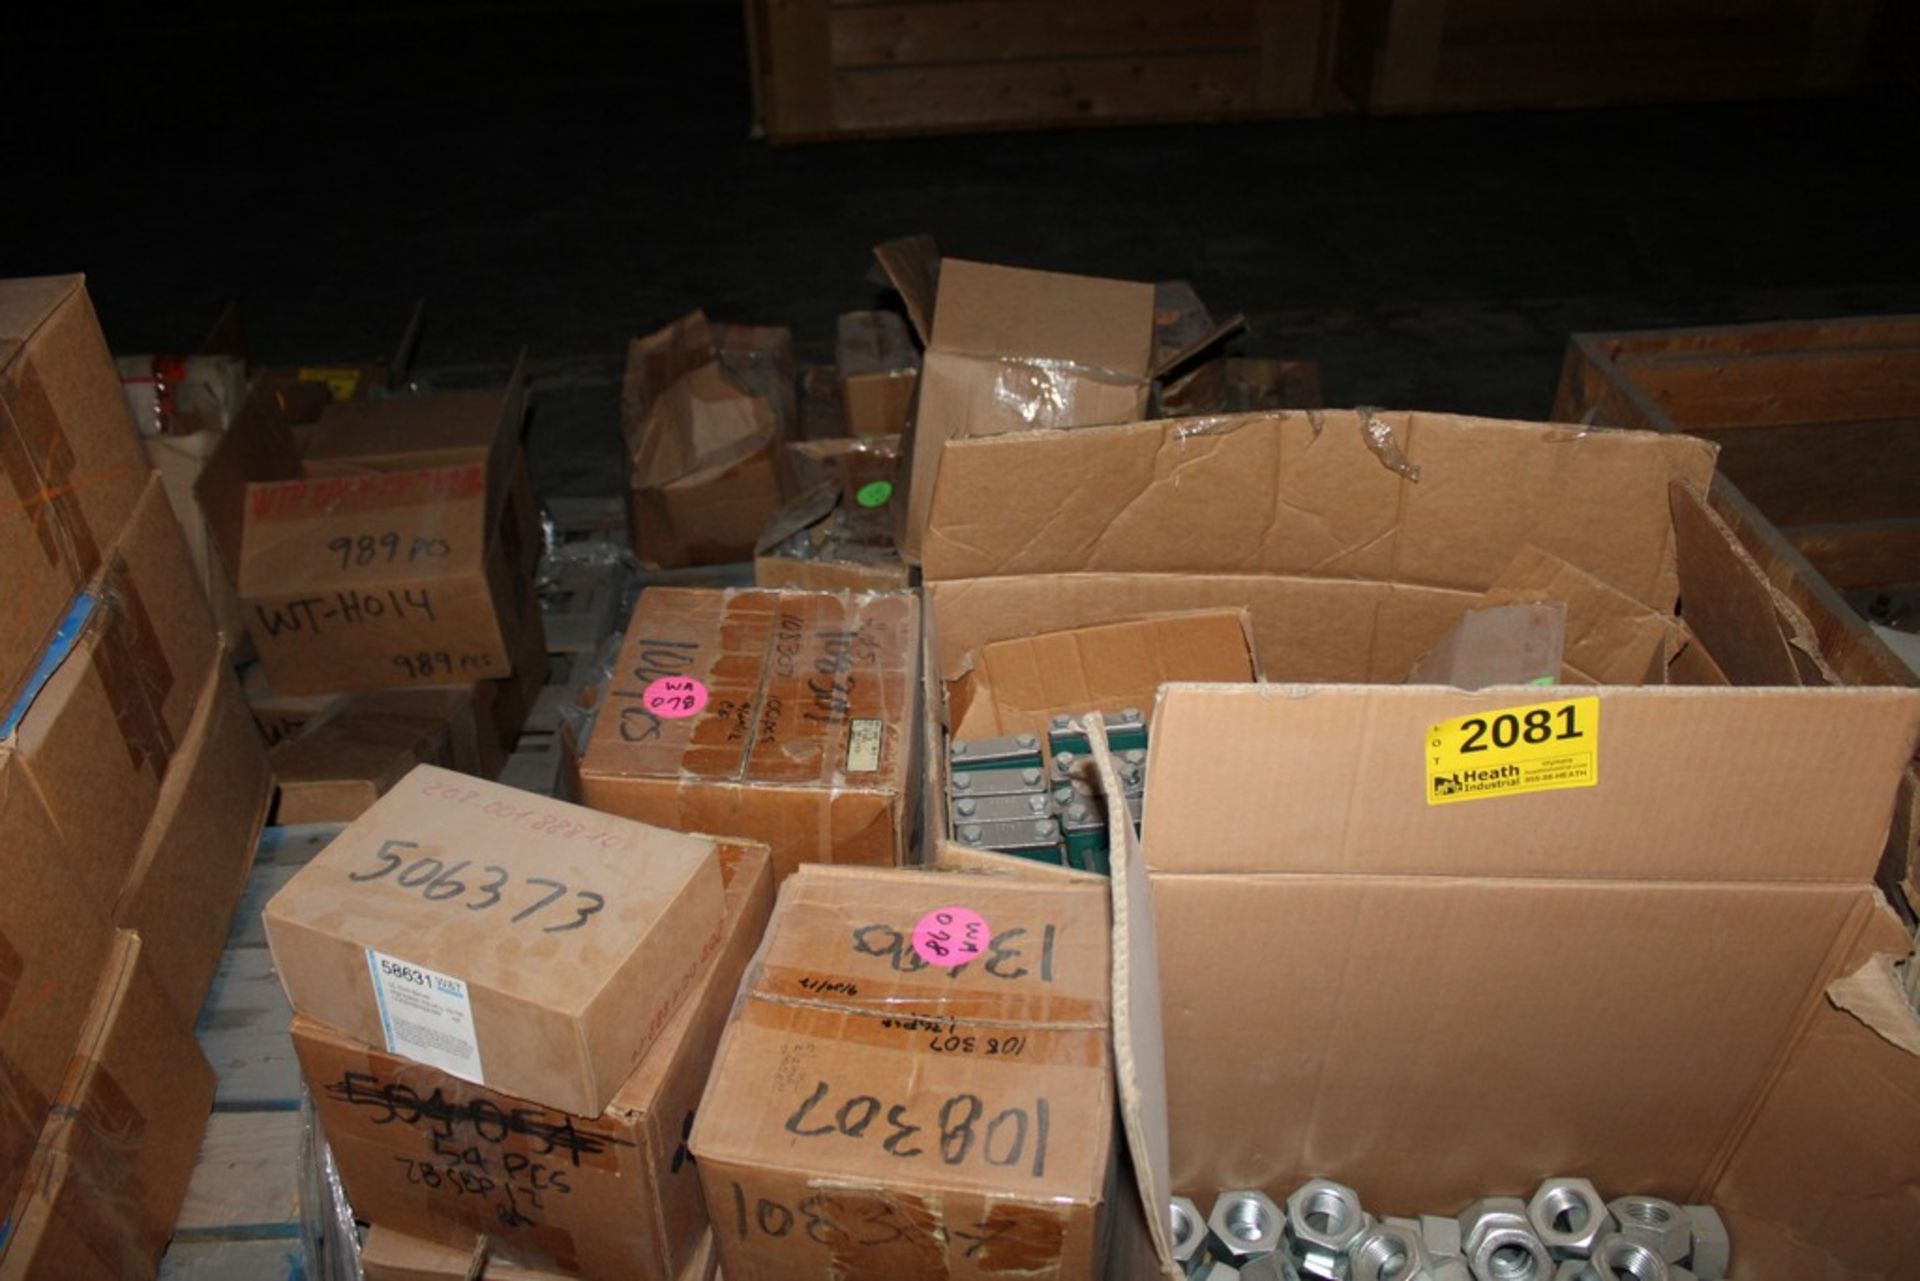 LARGE QUANTITY OF BOLTS, HYDRAULIC FITTINGS, STEEL PLATES, ETC. - Image 2 of 3